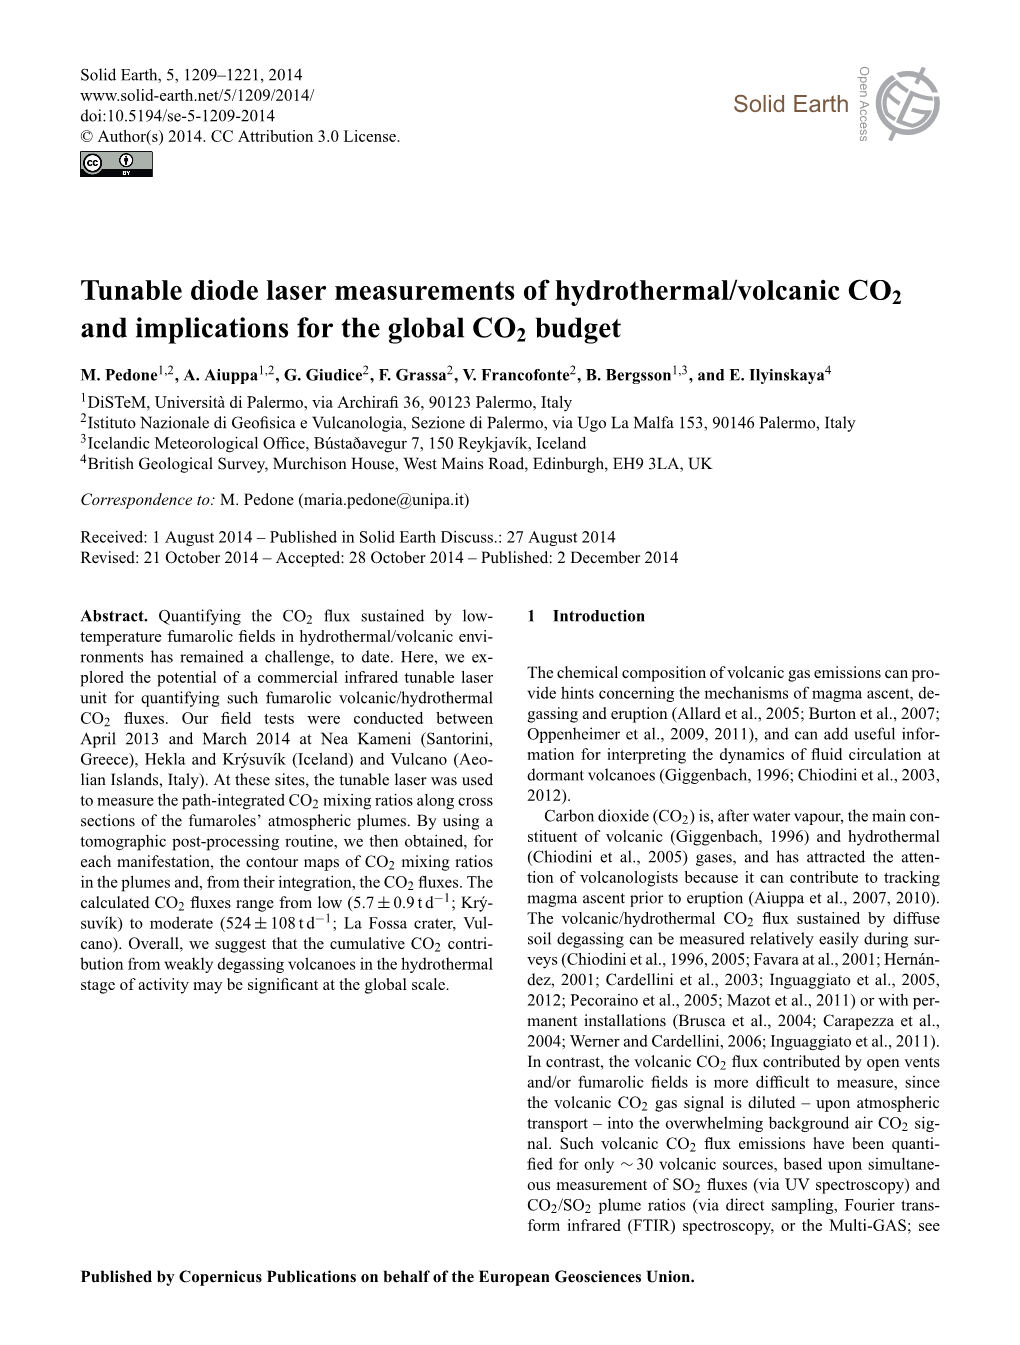 Tunable Diode Laser Measurements of Hydrothermal/Volcanic CO2 and Implications for the Global CO2 Budget